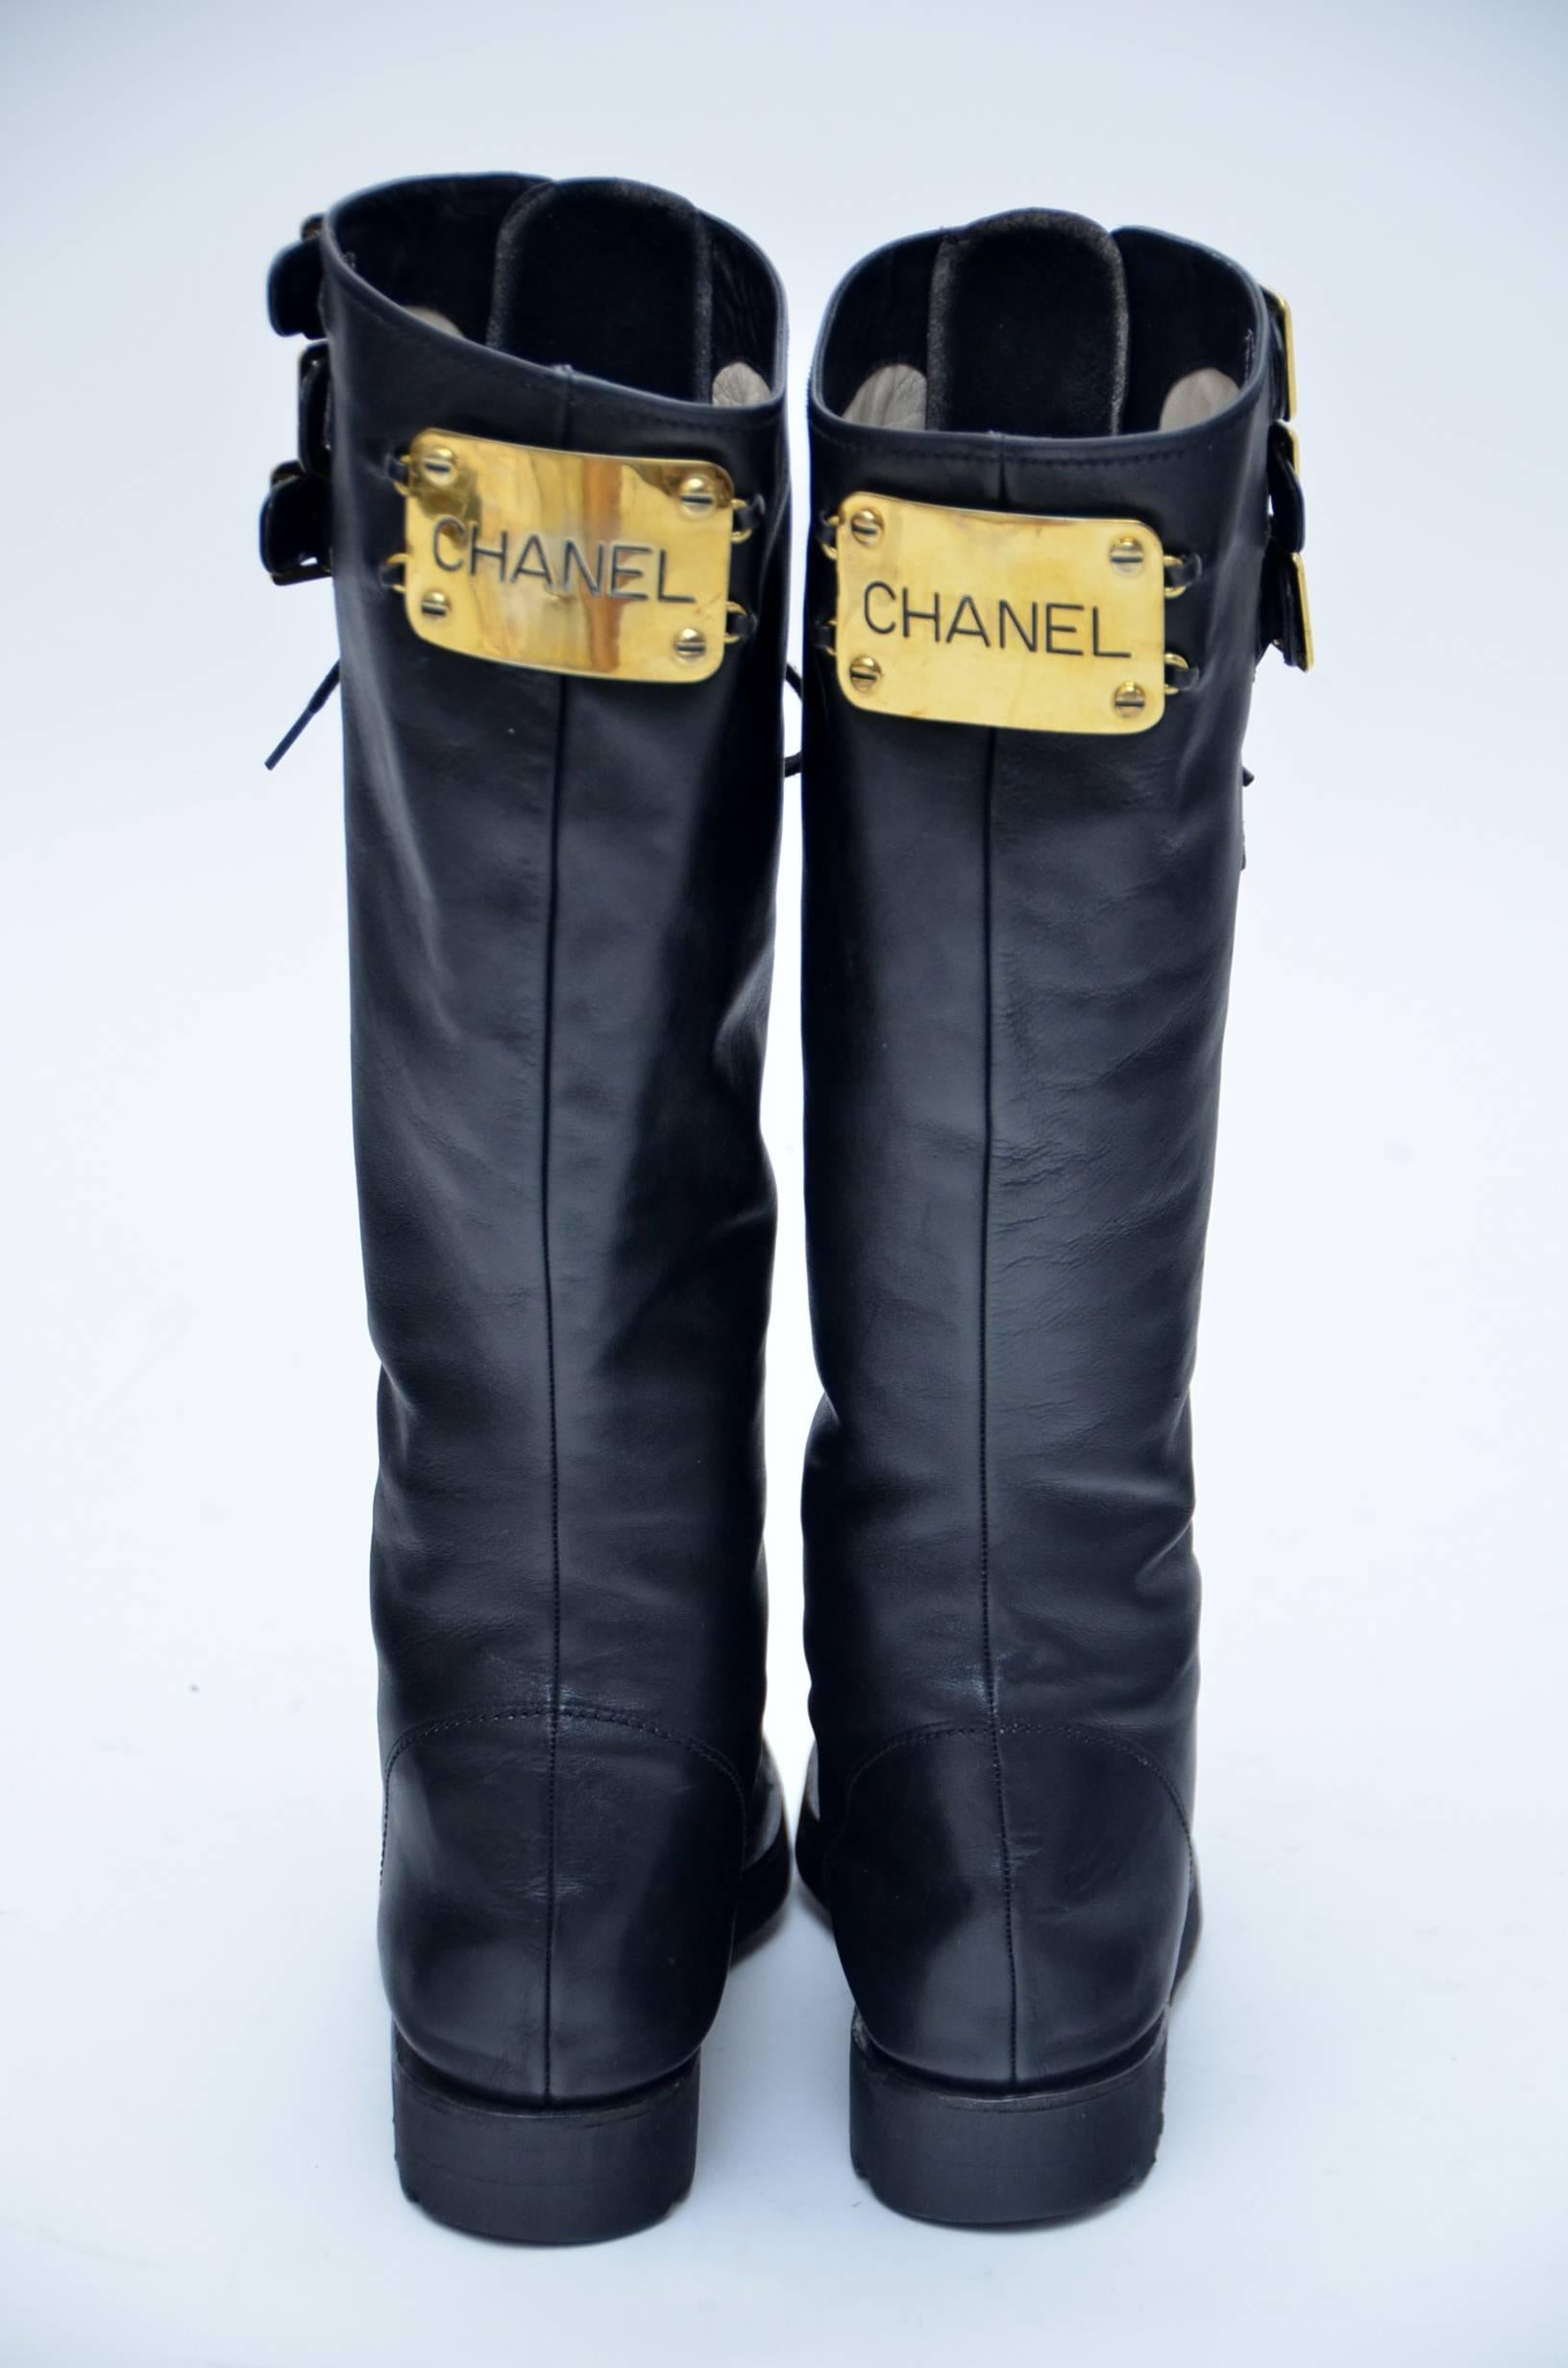 Iconic Chanel combat boots .Imposible to find.These stunning boots have a sturdy rubber base sole with laces the entire length. There are three gold buckles at the top and a gold plaque behind with the cut-out Chanel name logo. The toes each have a